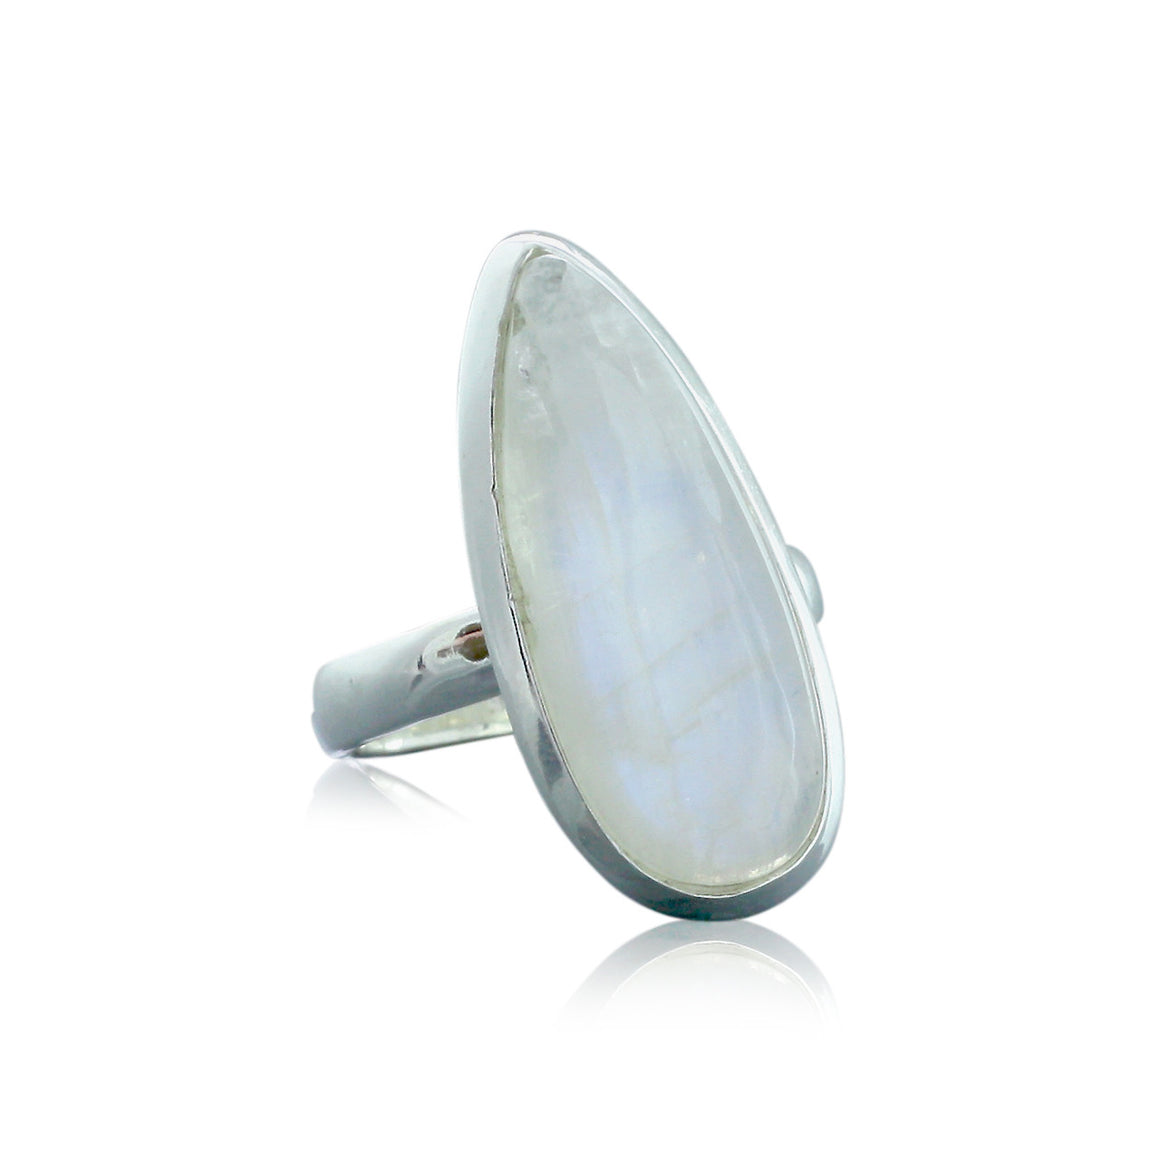 Rainbow Moonstone Ring - One of a Kind